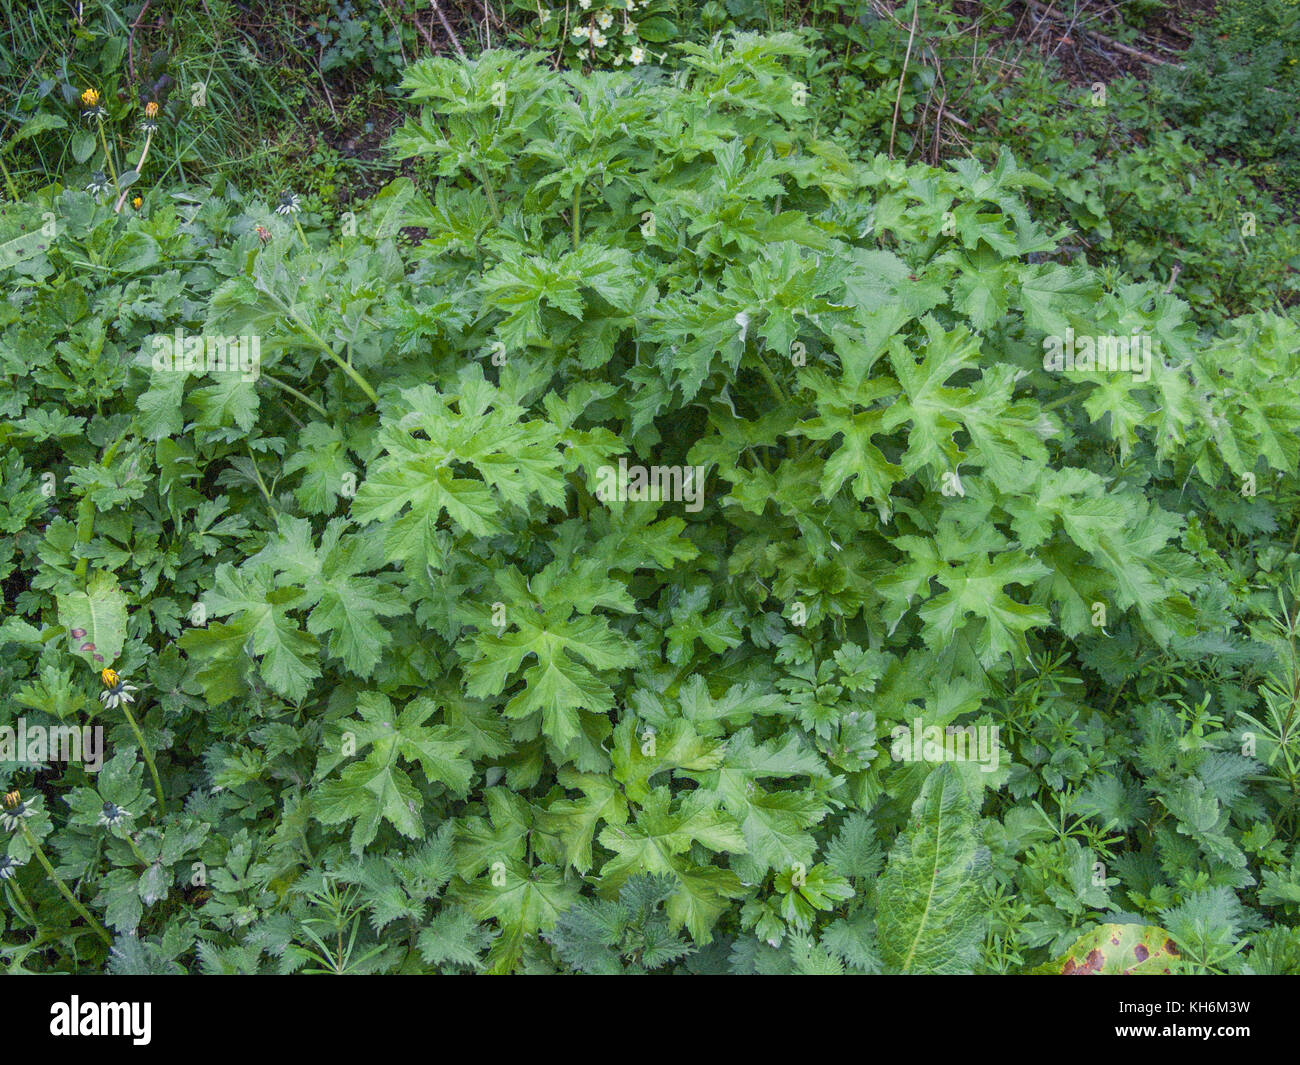 Example of Hogweed / Cow Parsnip / Heracleum sphondylium growing in hedgerow. Causes (particularly sap) photosensitivity reactions in some people. Stock Photo